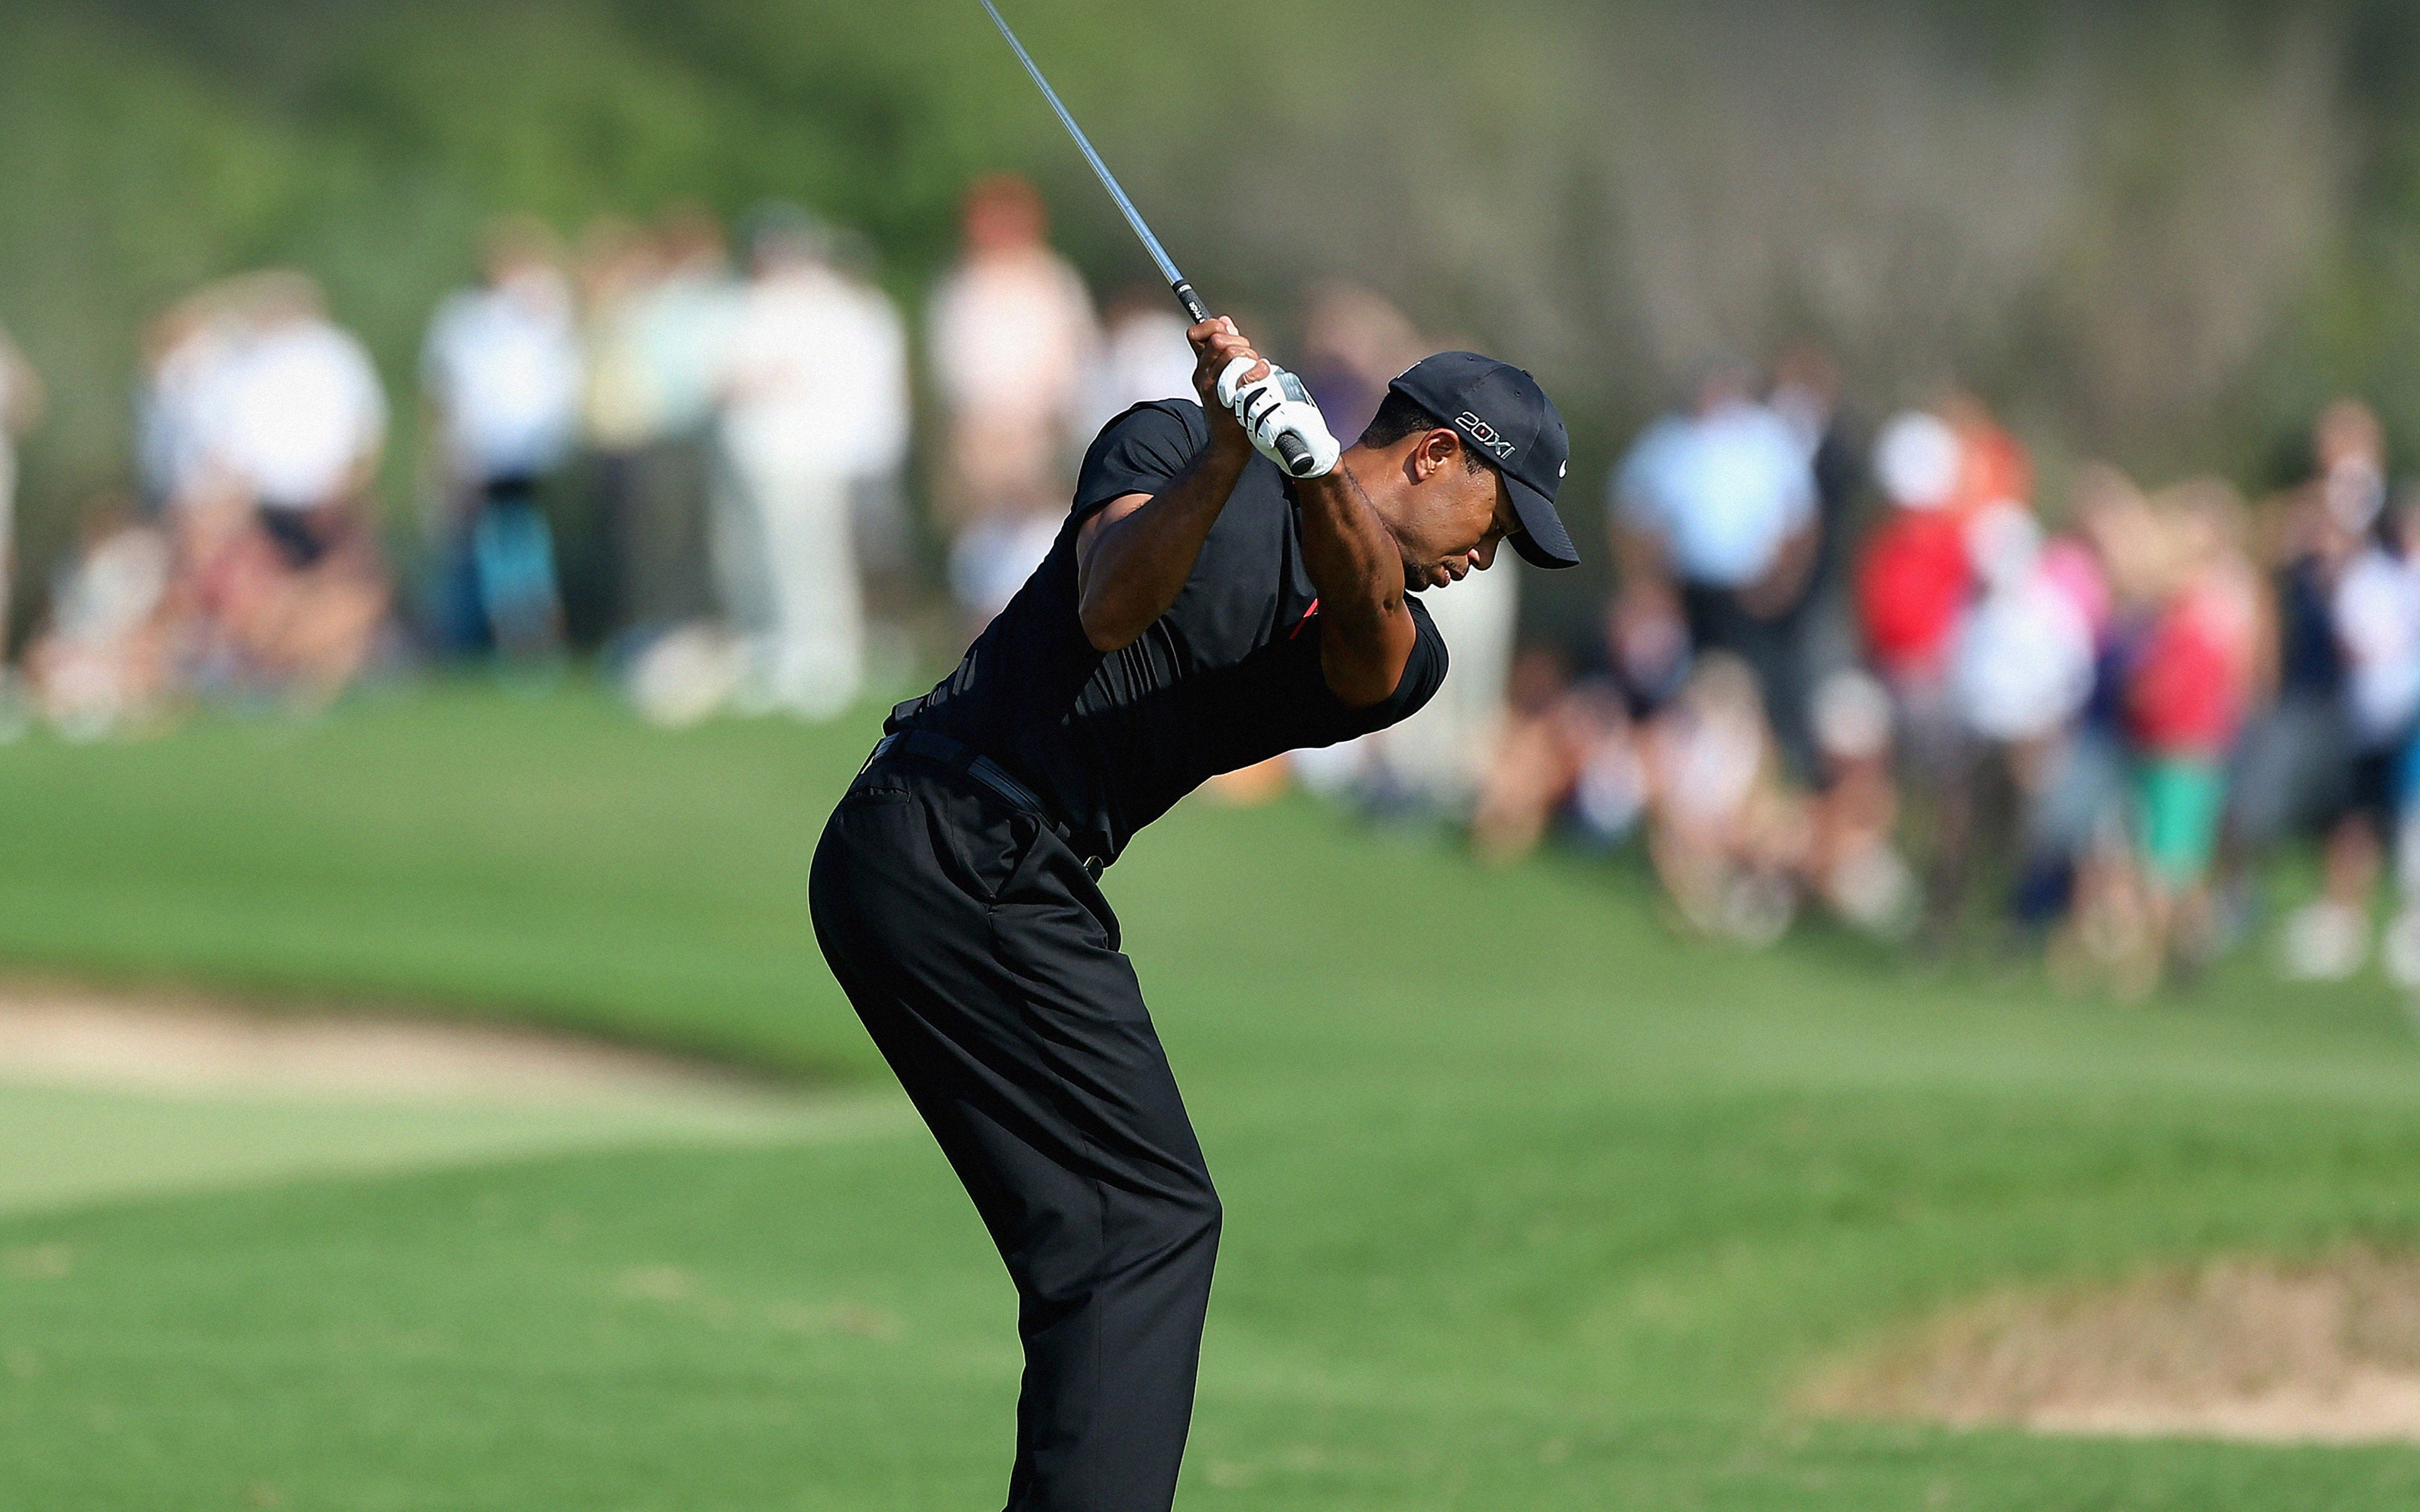 tiger, woods, golf, sports, focus on foreground, one person